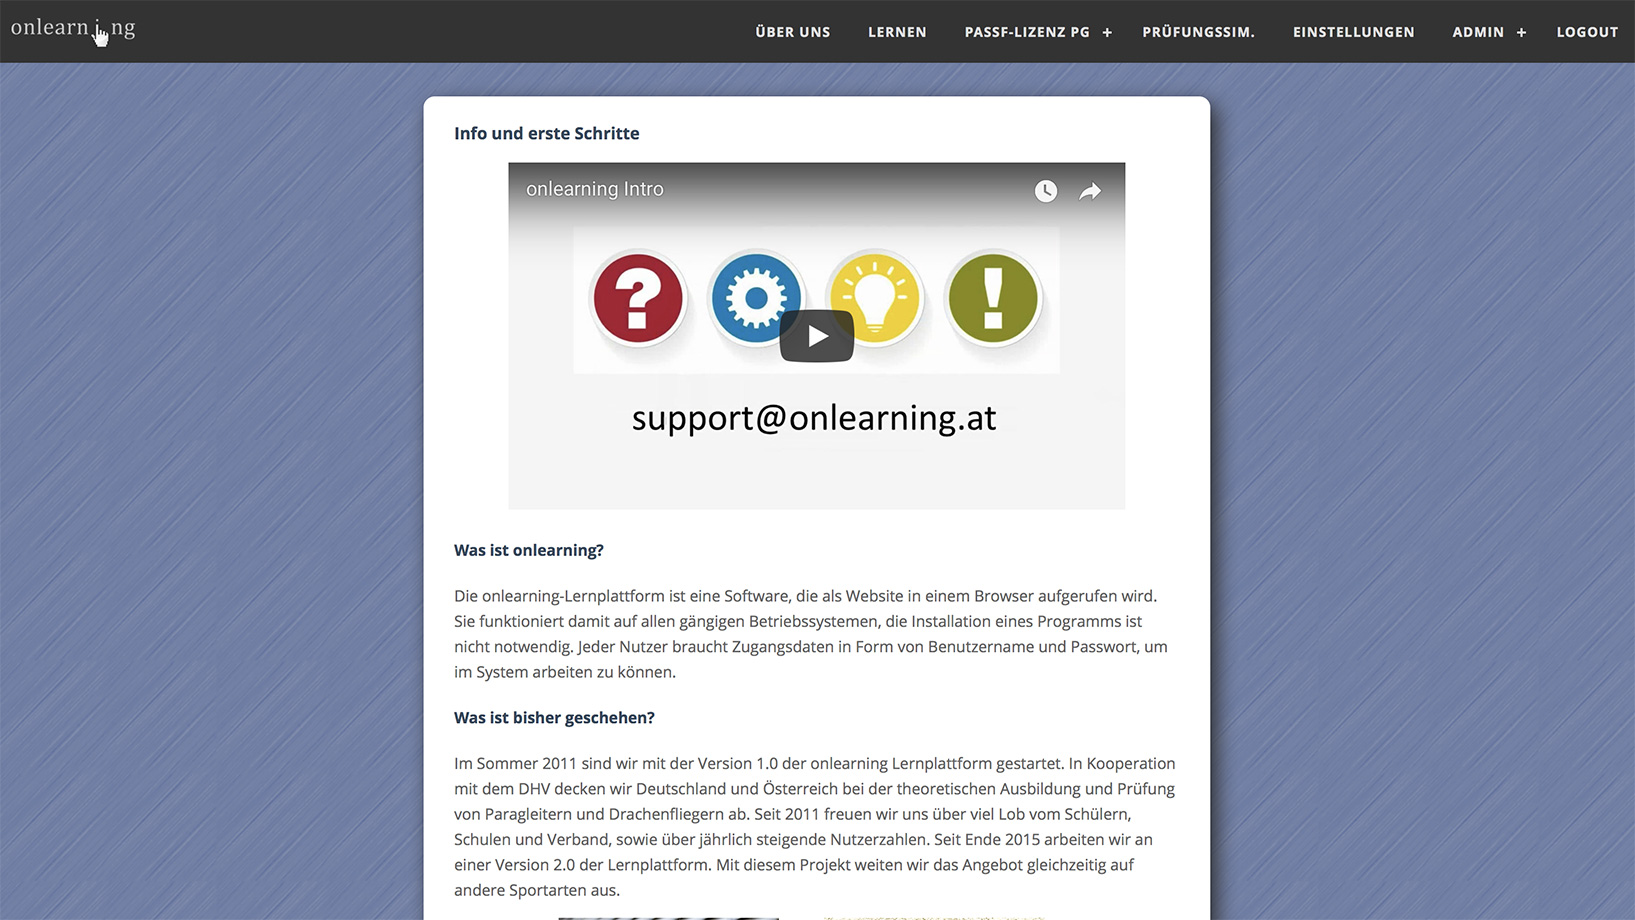 onlearning.at